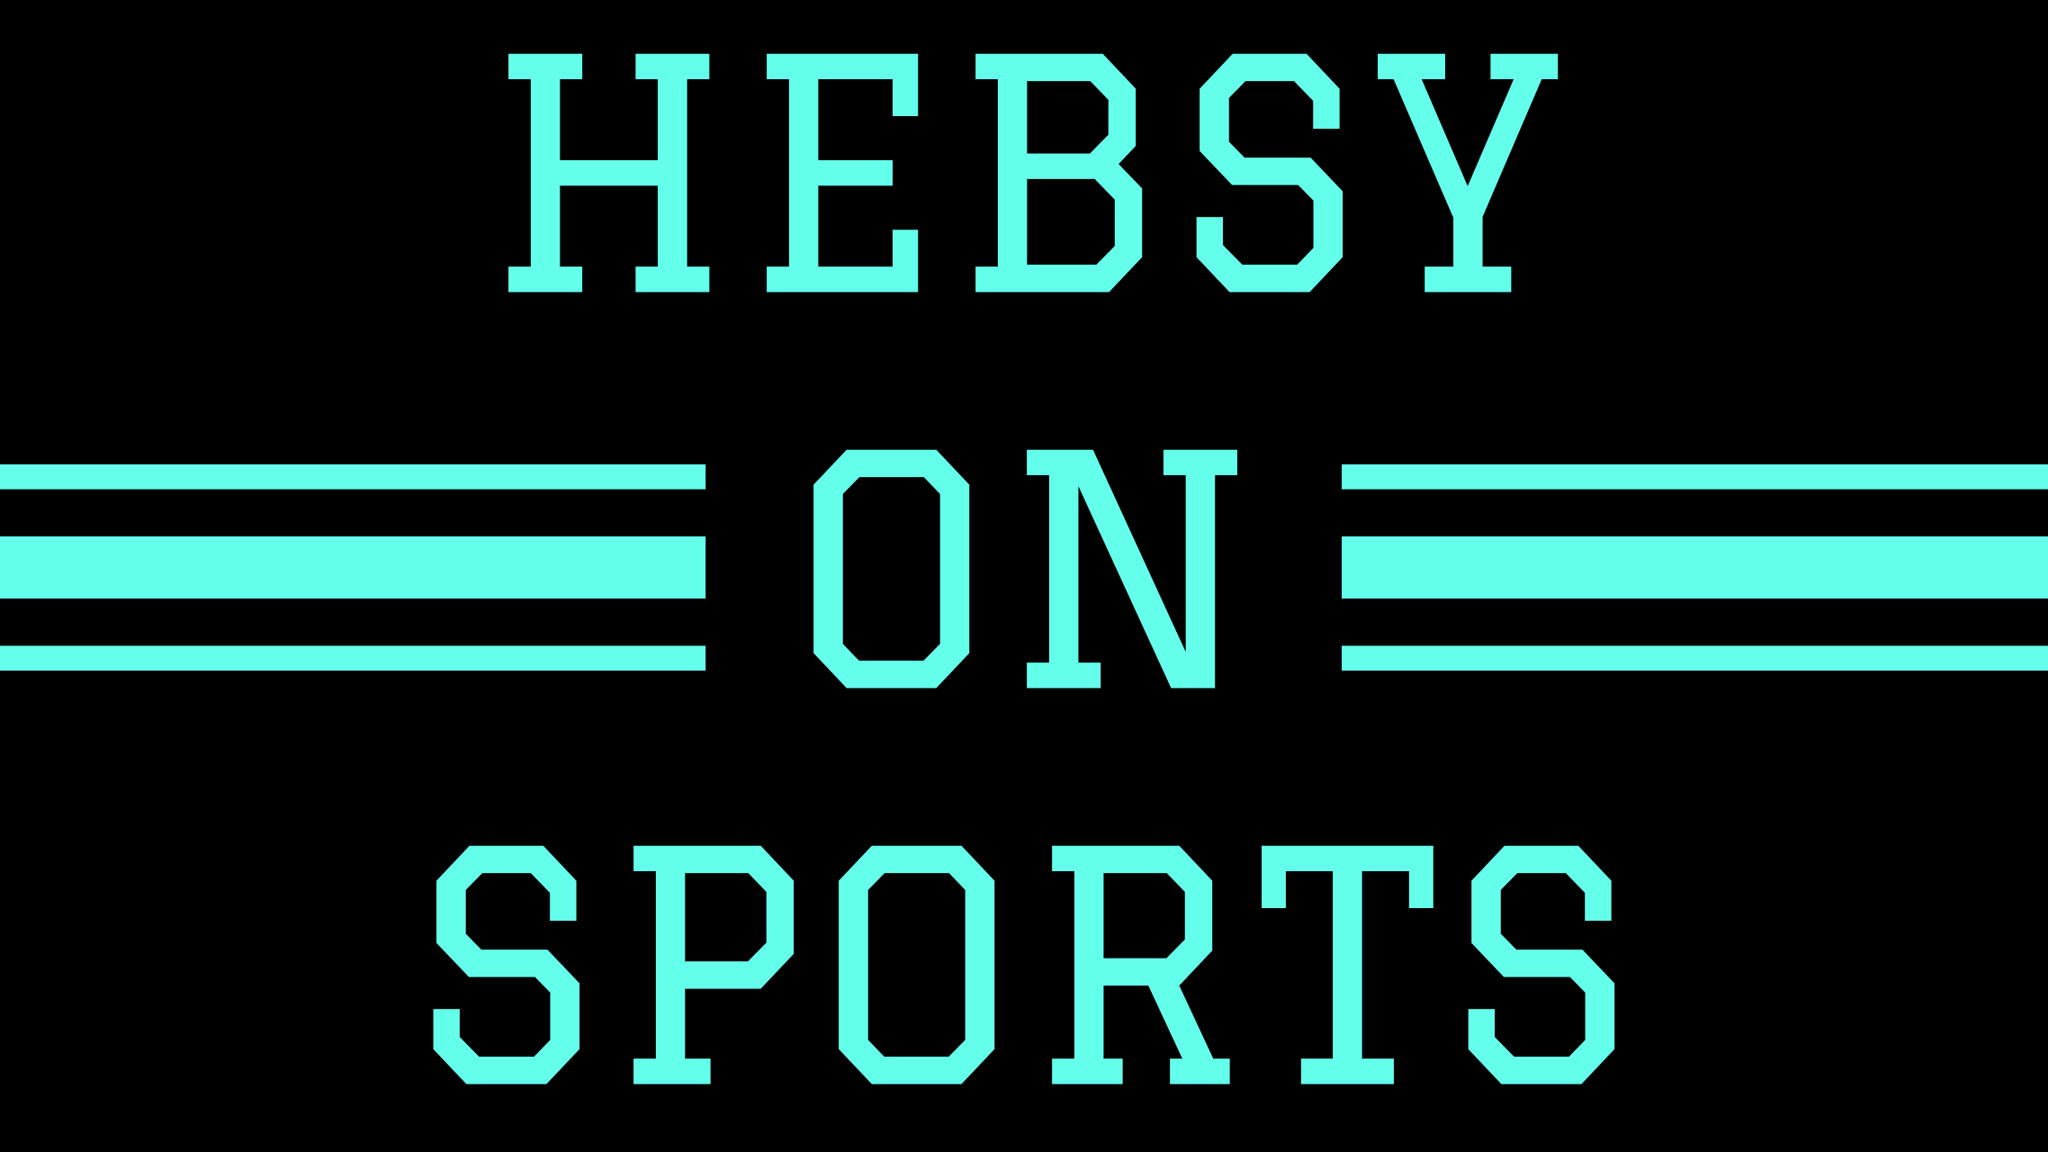 Hebsy on Sports for September 3, 2021